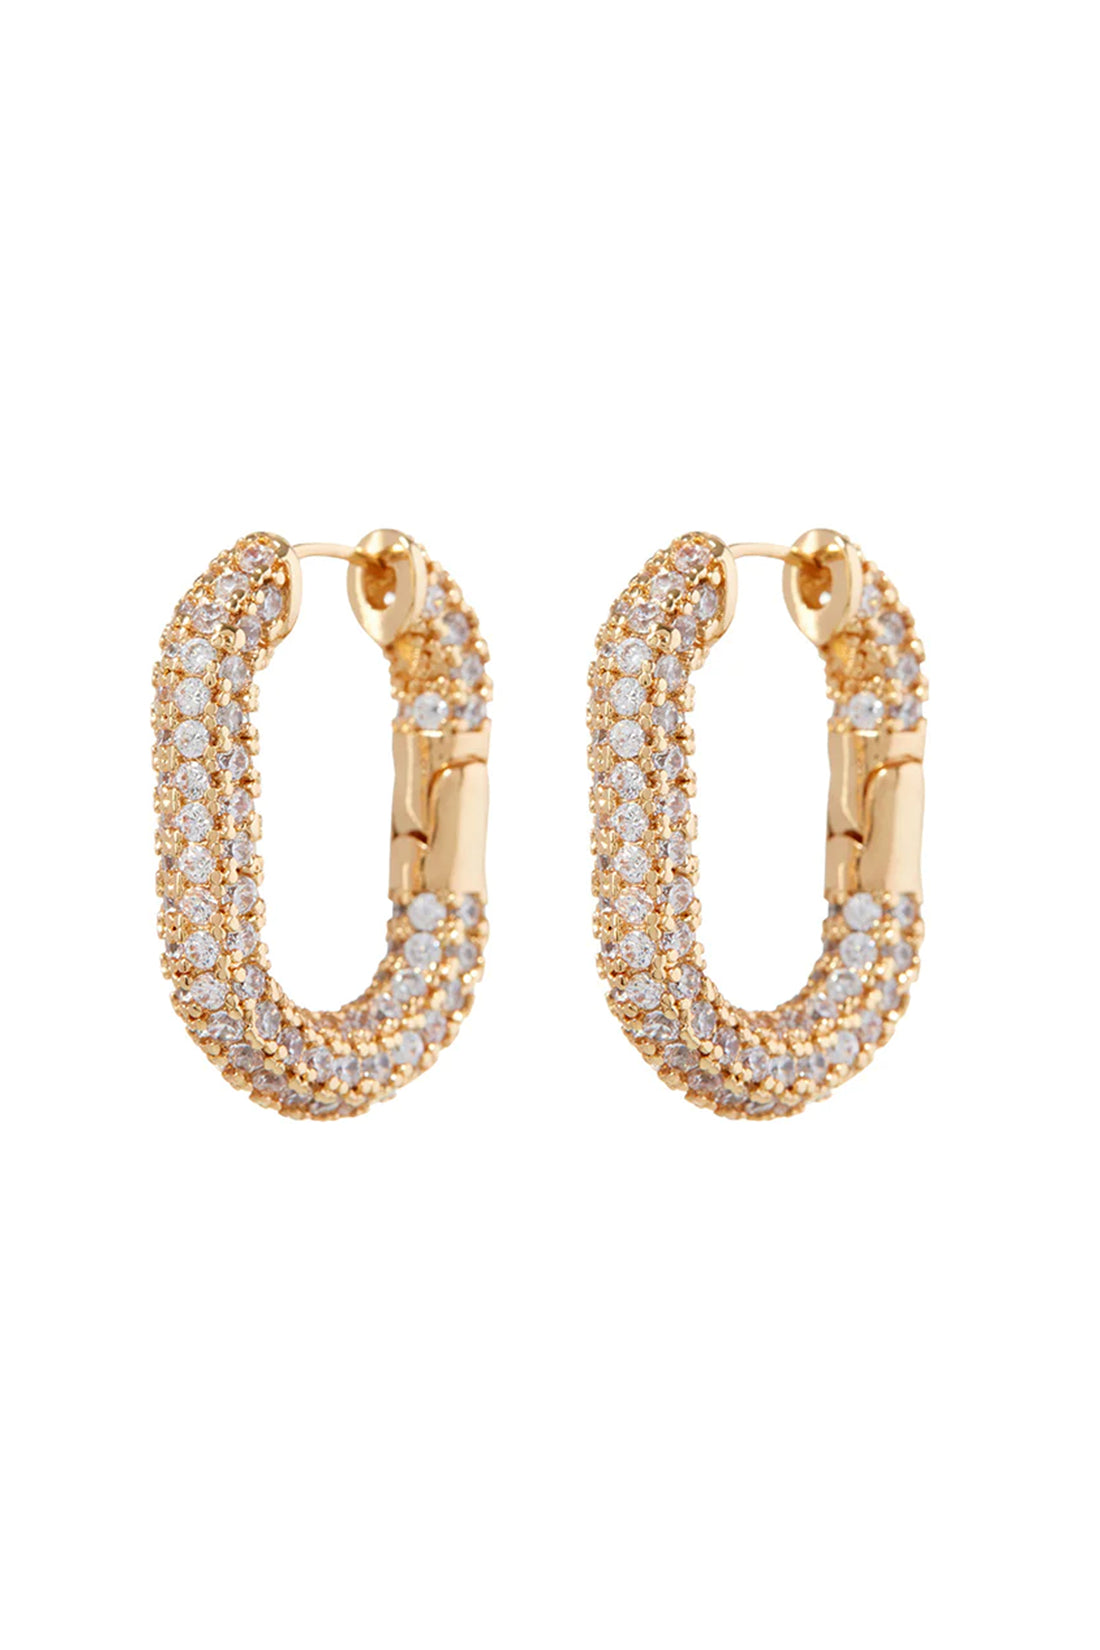 XL Pave Chain Link Hoops - Gold